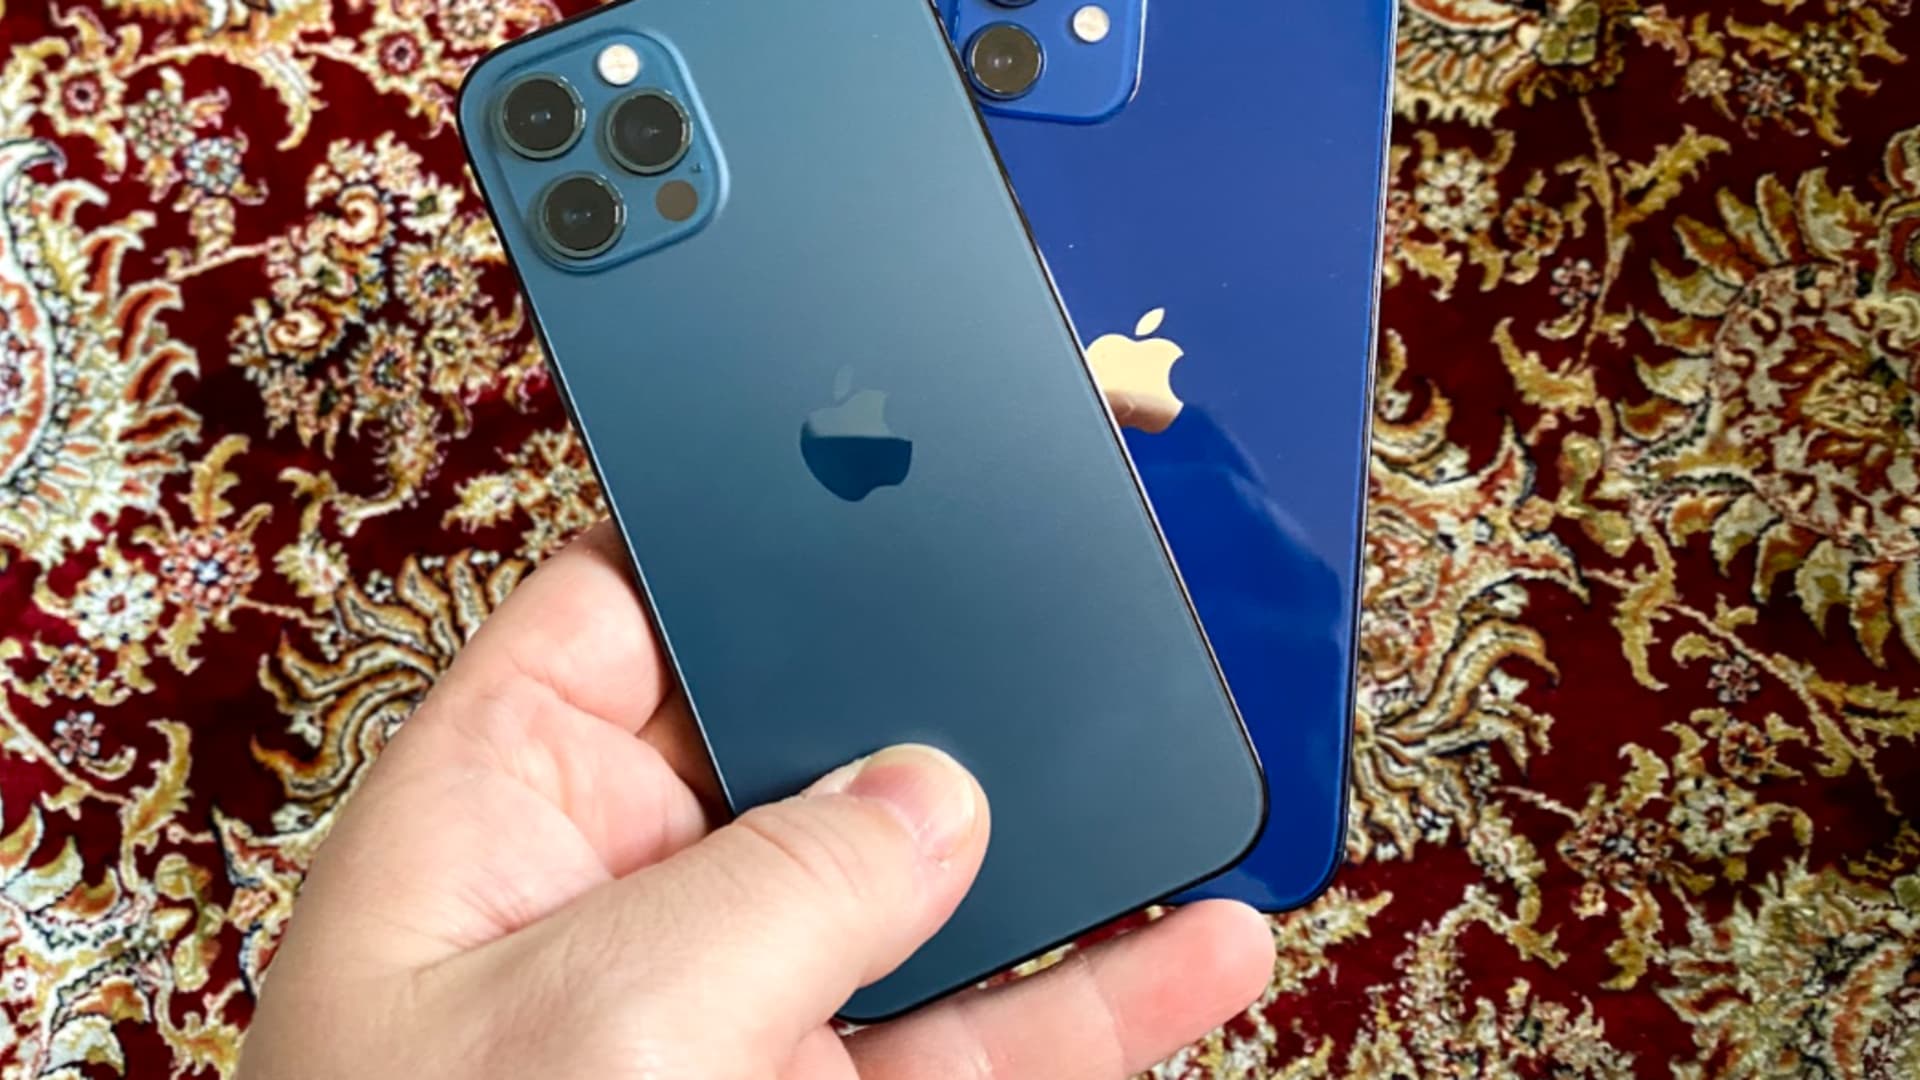 Apple iPhone 12 Pro Max review: Biggest, best iPhone of the year